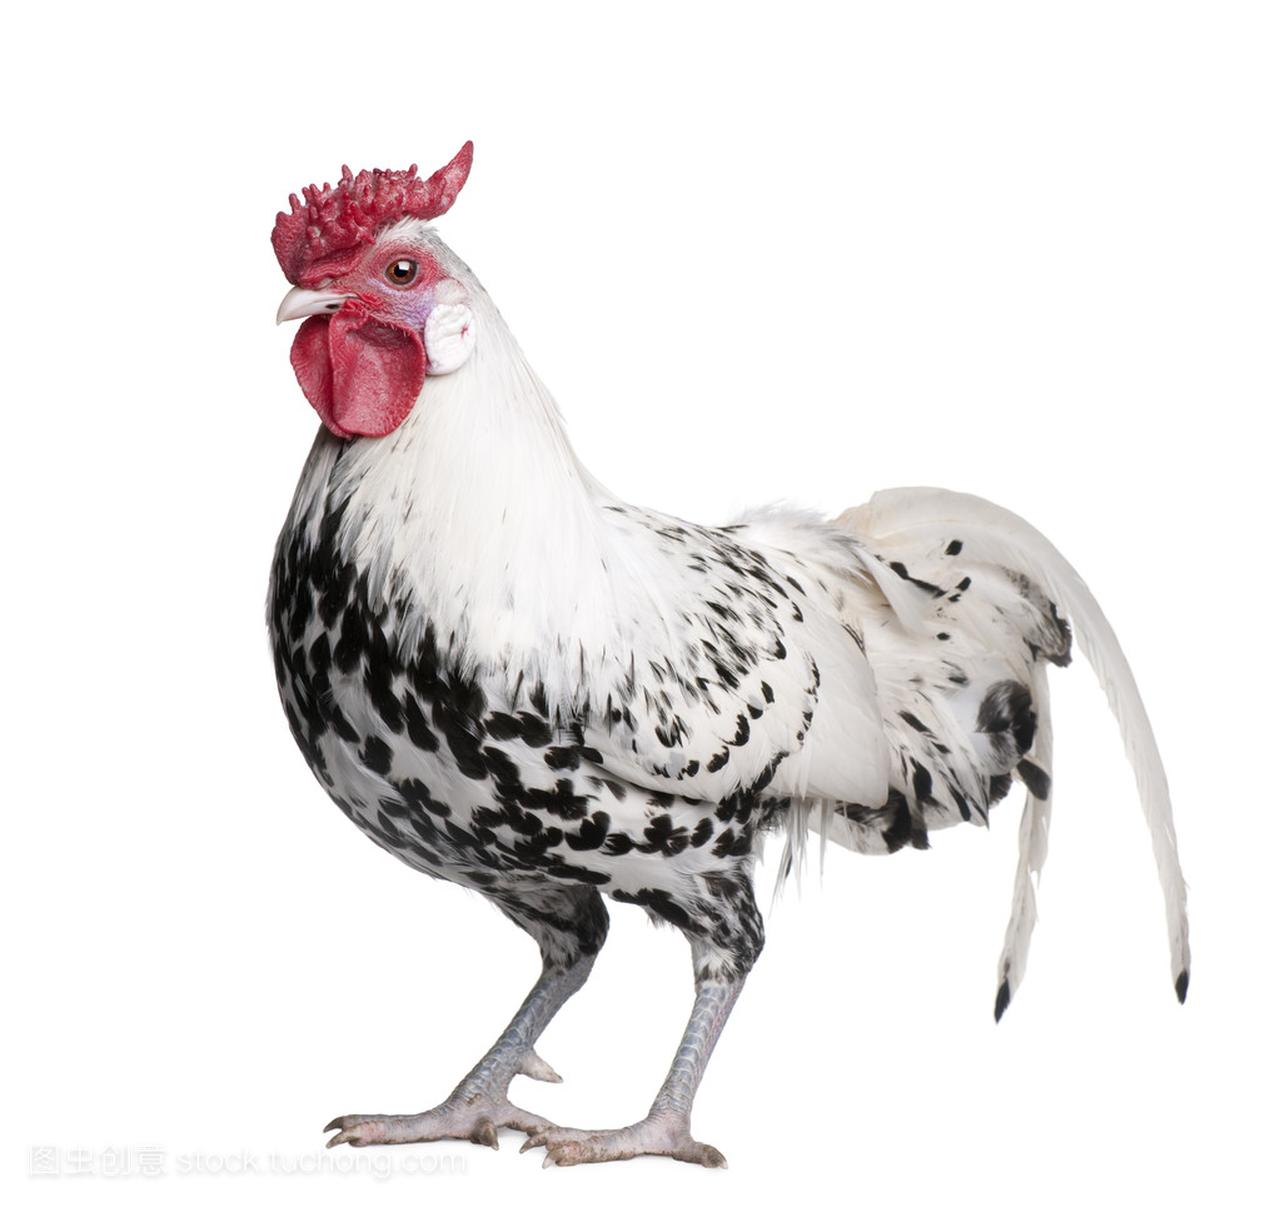 ilver Spangled Hamburg rooster (1 year old)